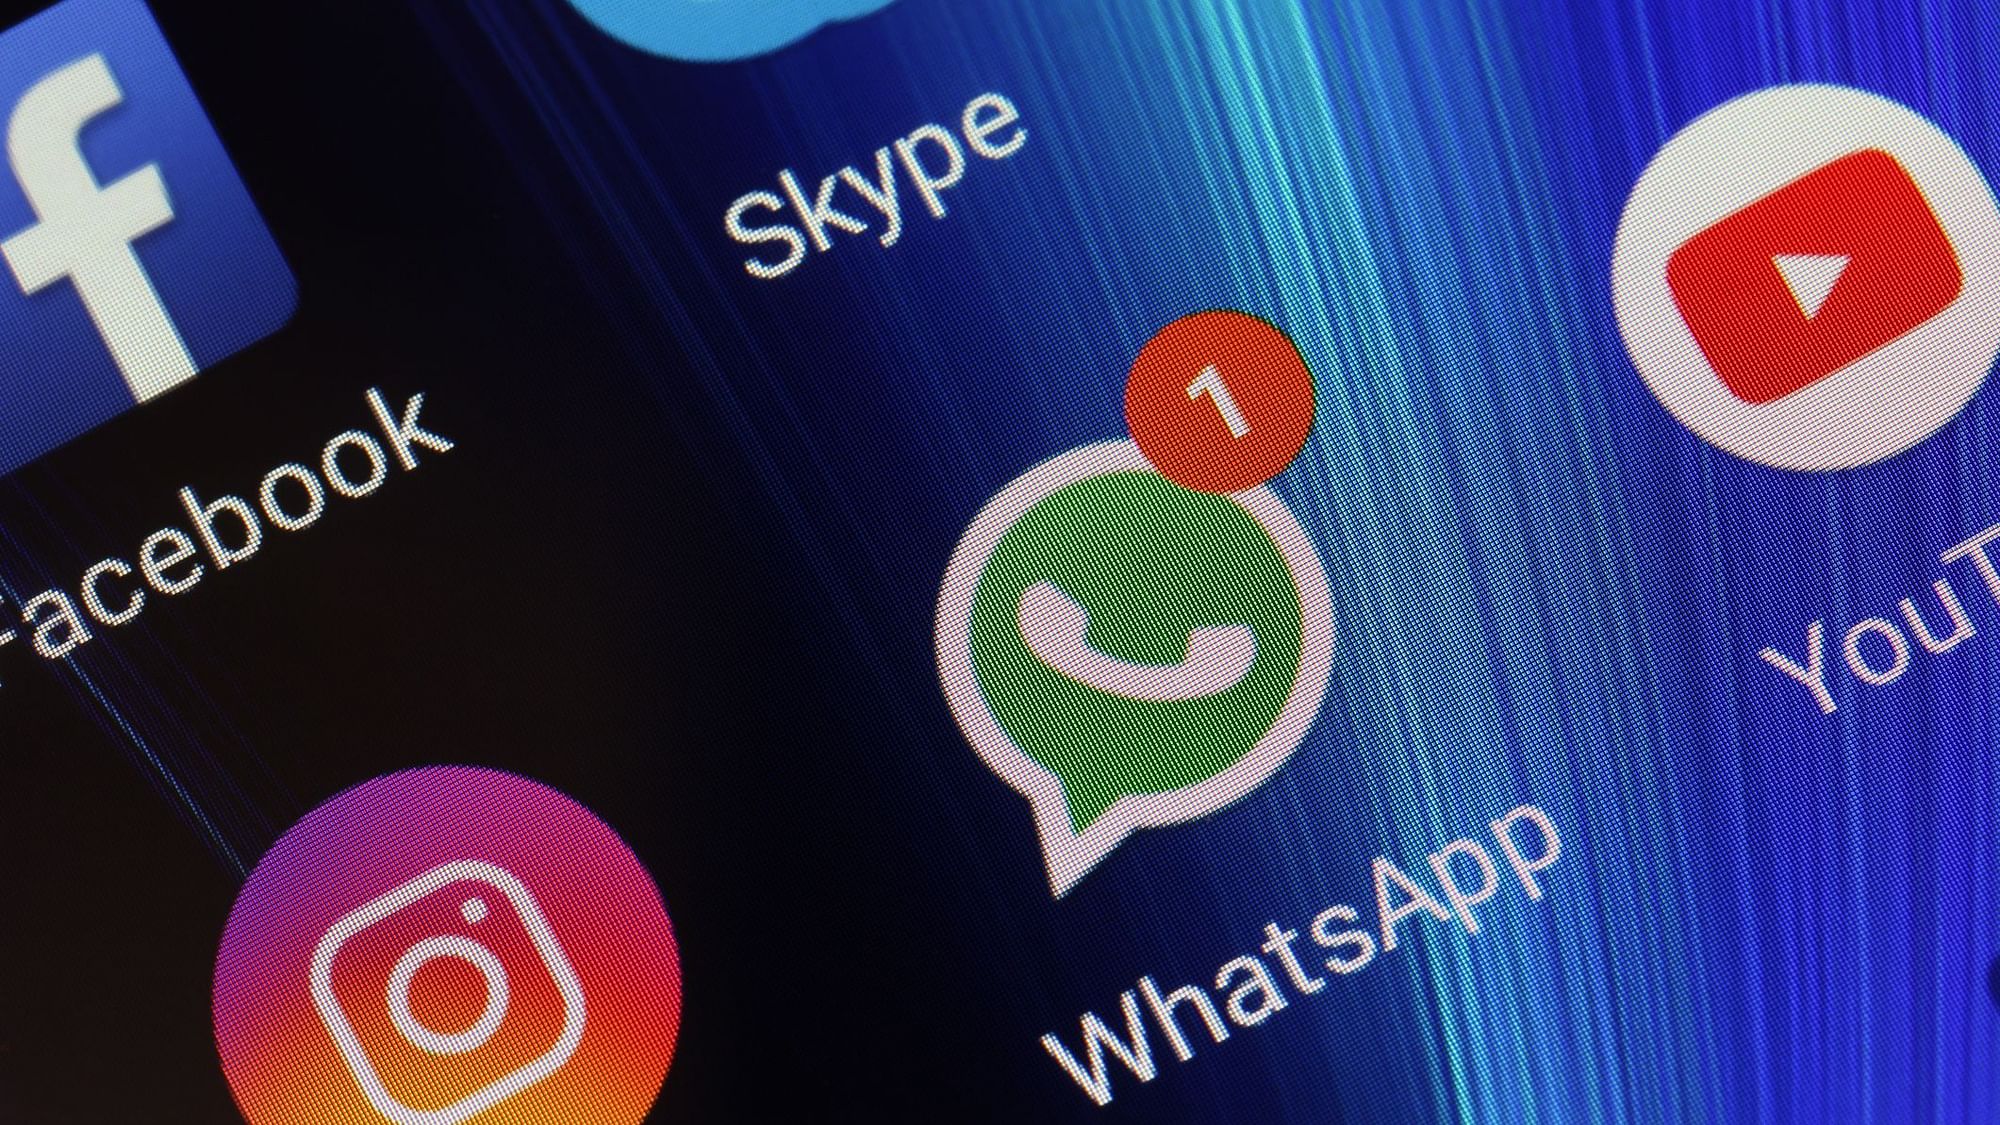 In 2017, a similar WhatsApp-themed scam made the rounds that promised to unlock free Internet access.